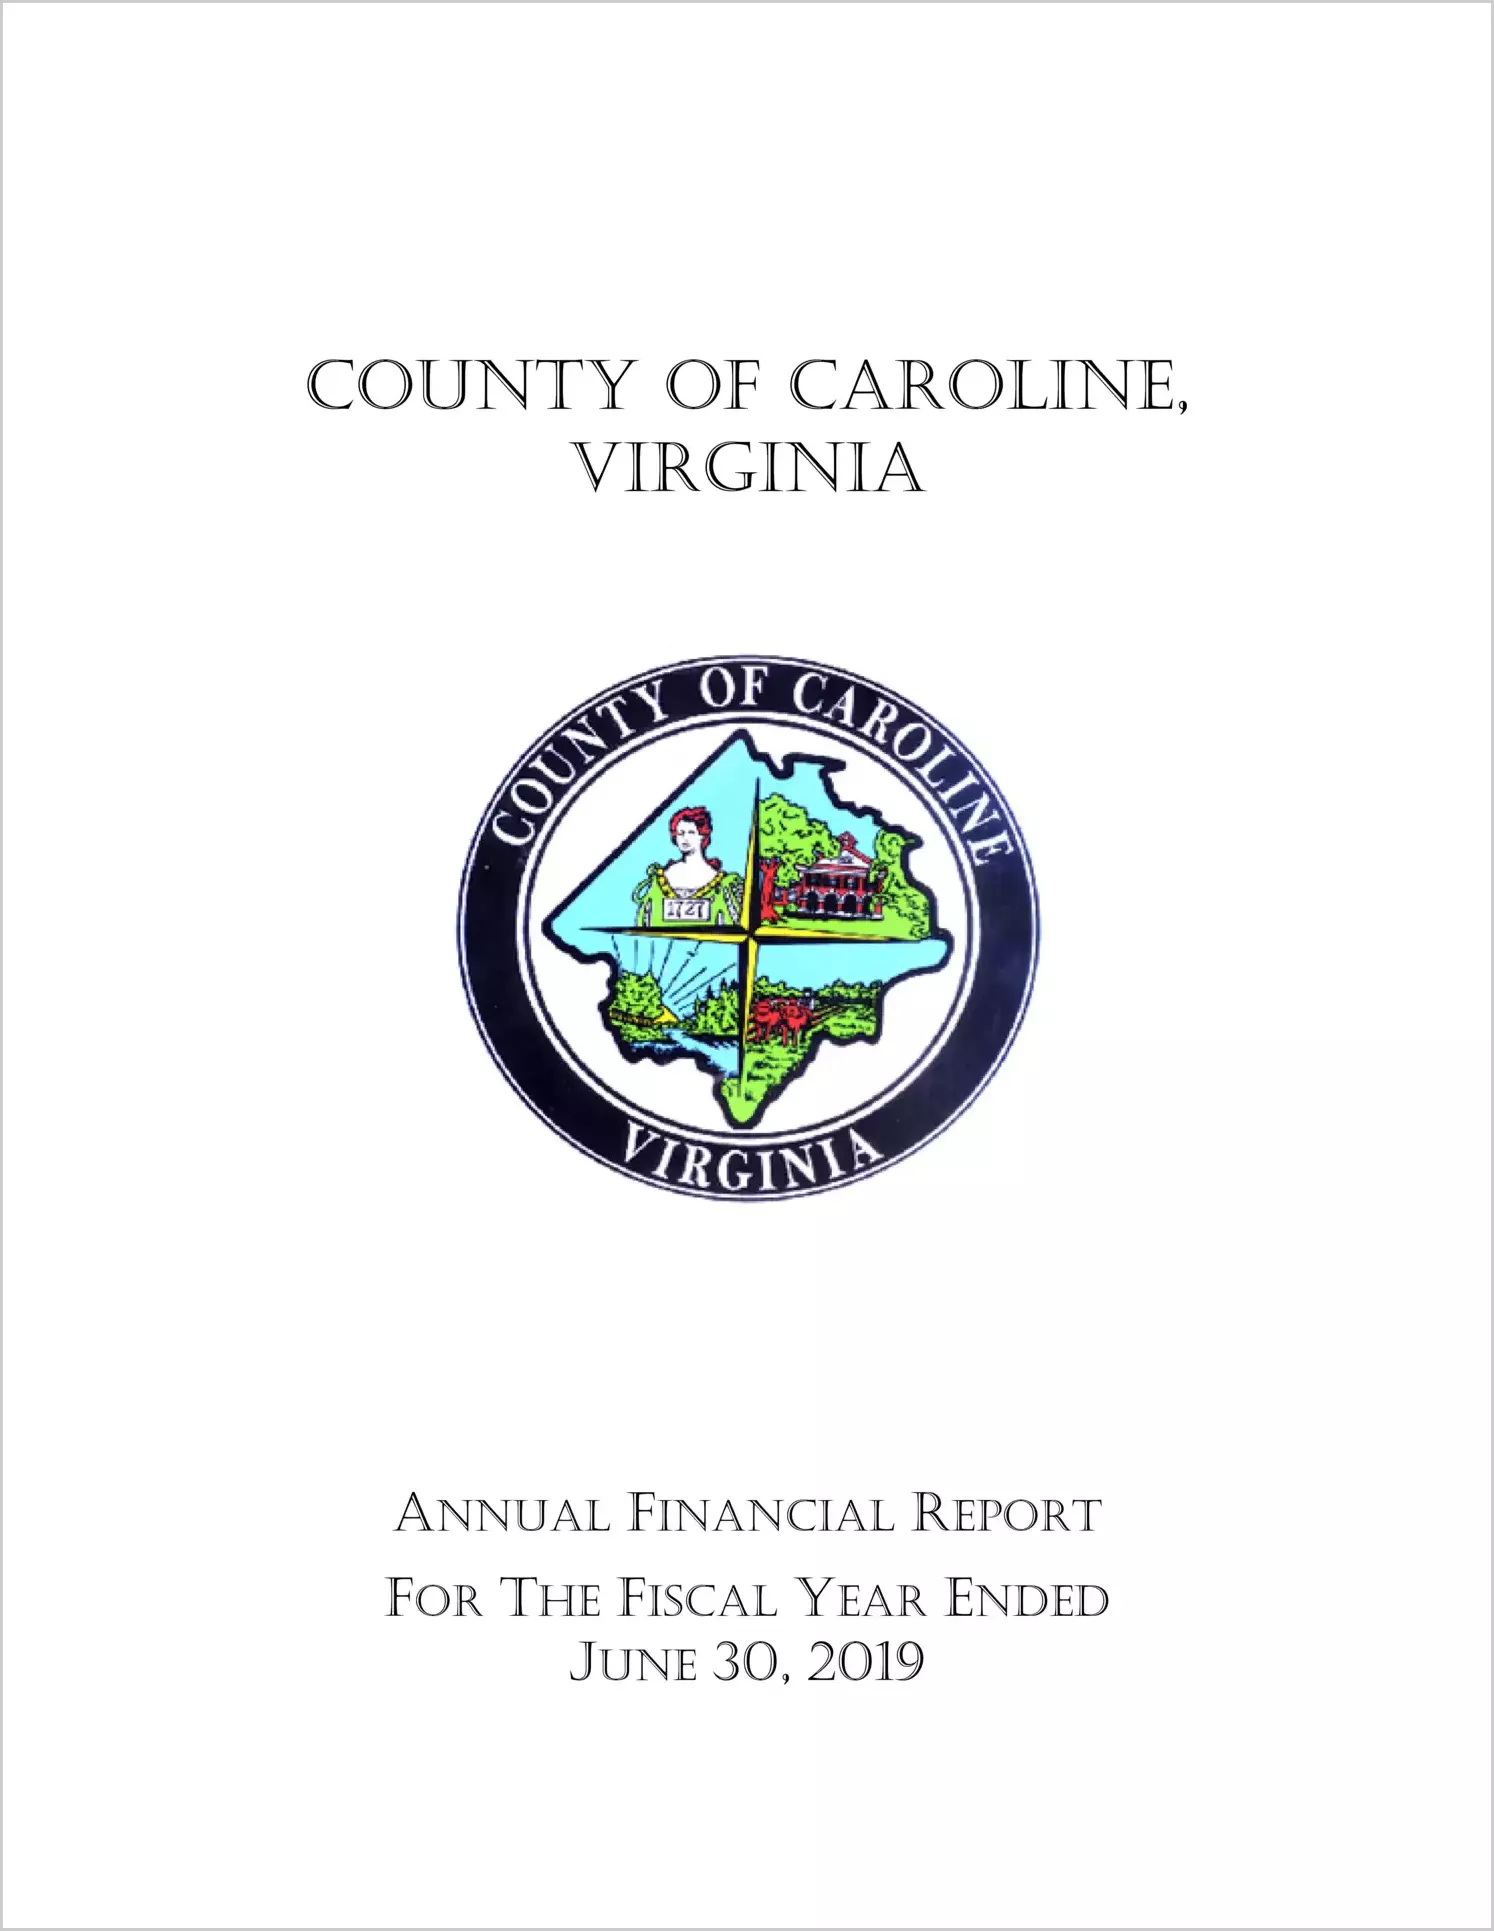 2019 Annual Financial Report for County of Caroline